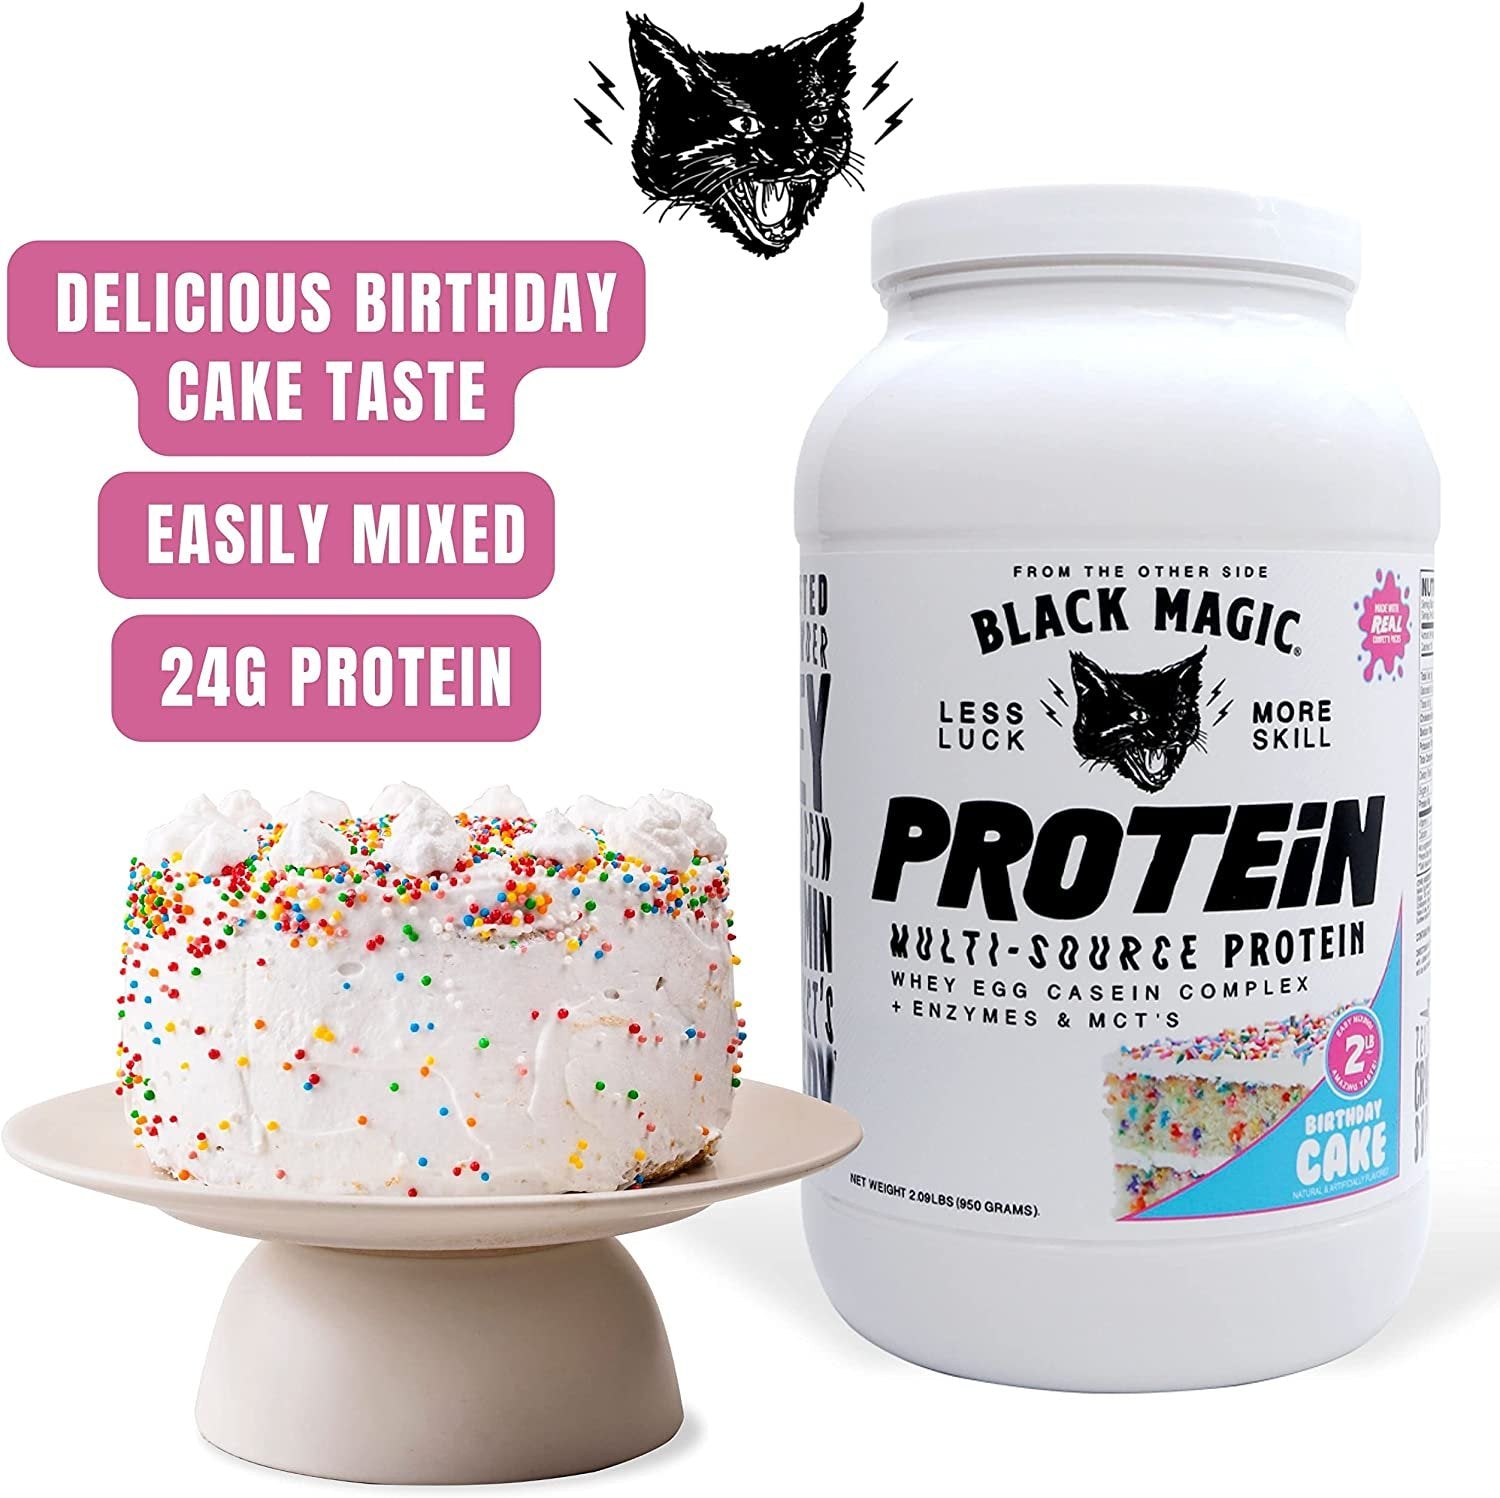 Birthday Cake Black Magic Multi-Source Protein - Whey, Egg, and Casein Complex with Enzymes & MCT Powder - Pre Workout and Post Workout - 24g Protein - 2 LB with Bonus Key Chain